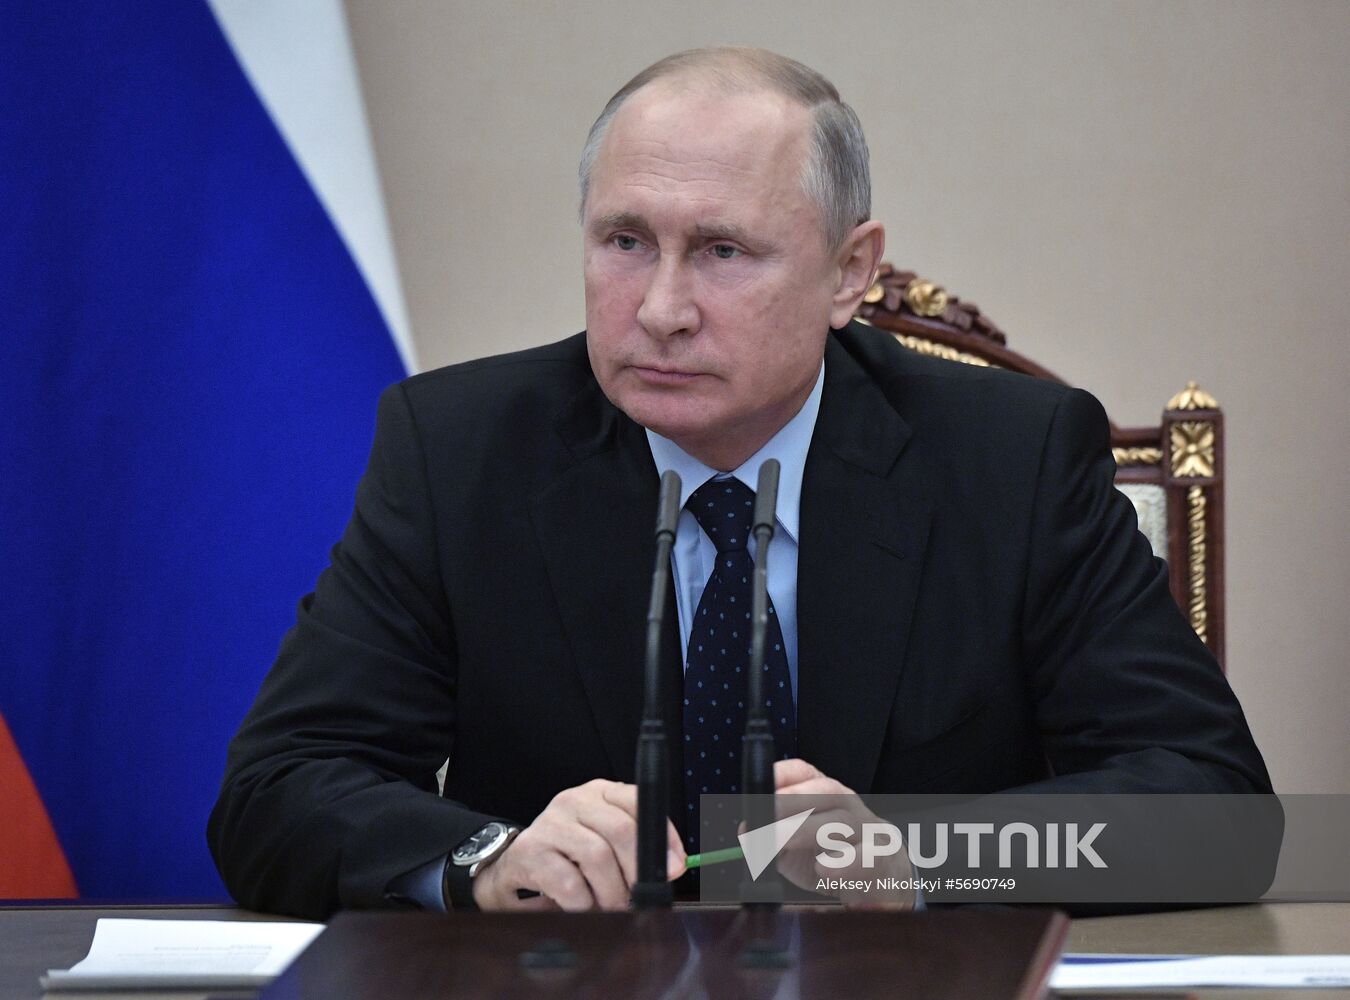 President Vladimir Putin chairs meeting with Security Council permanent members